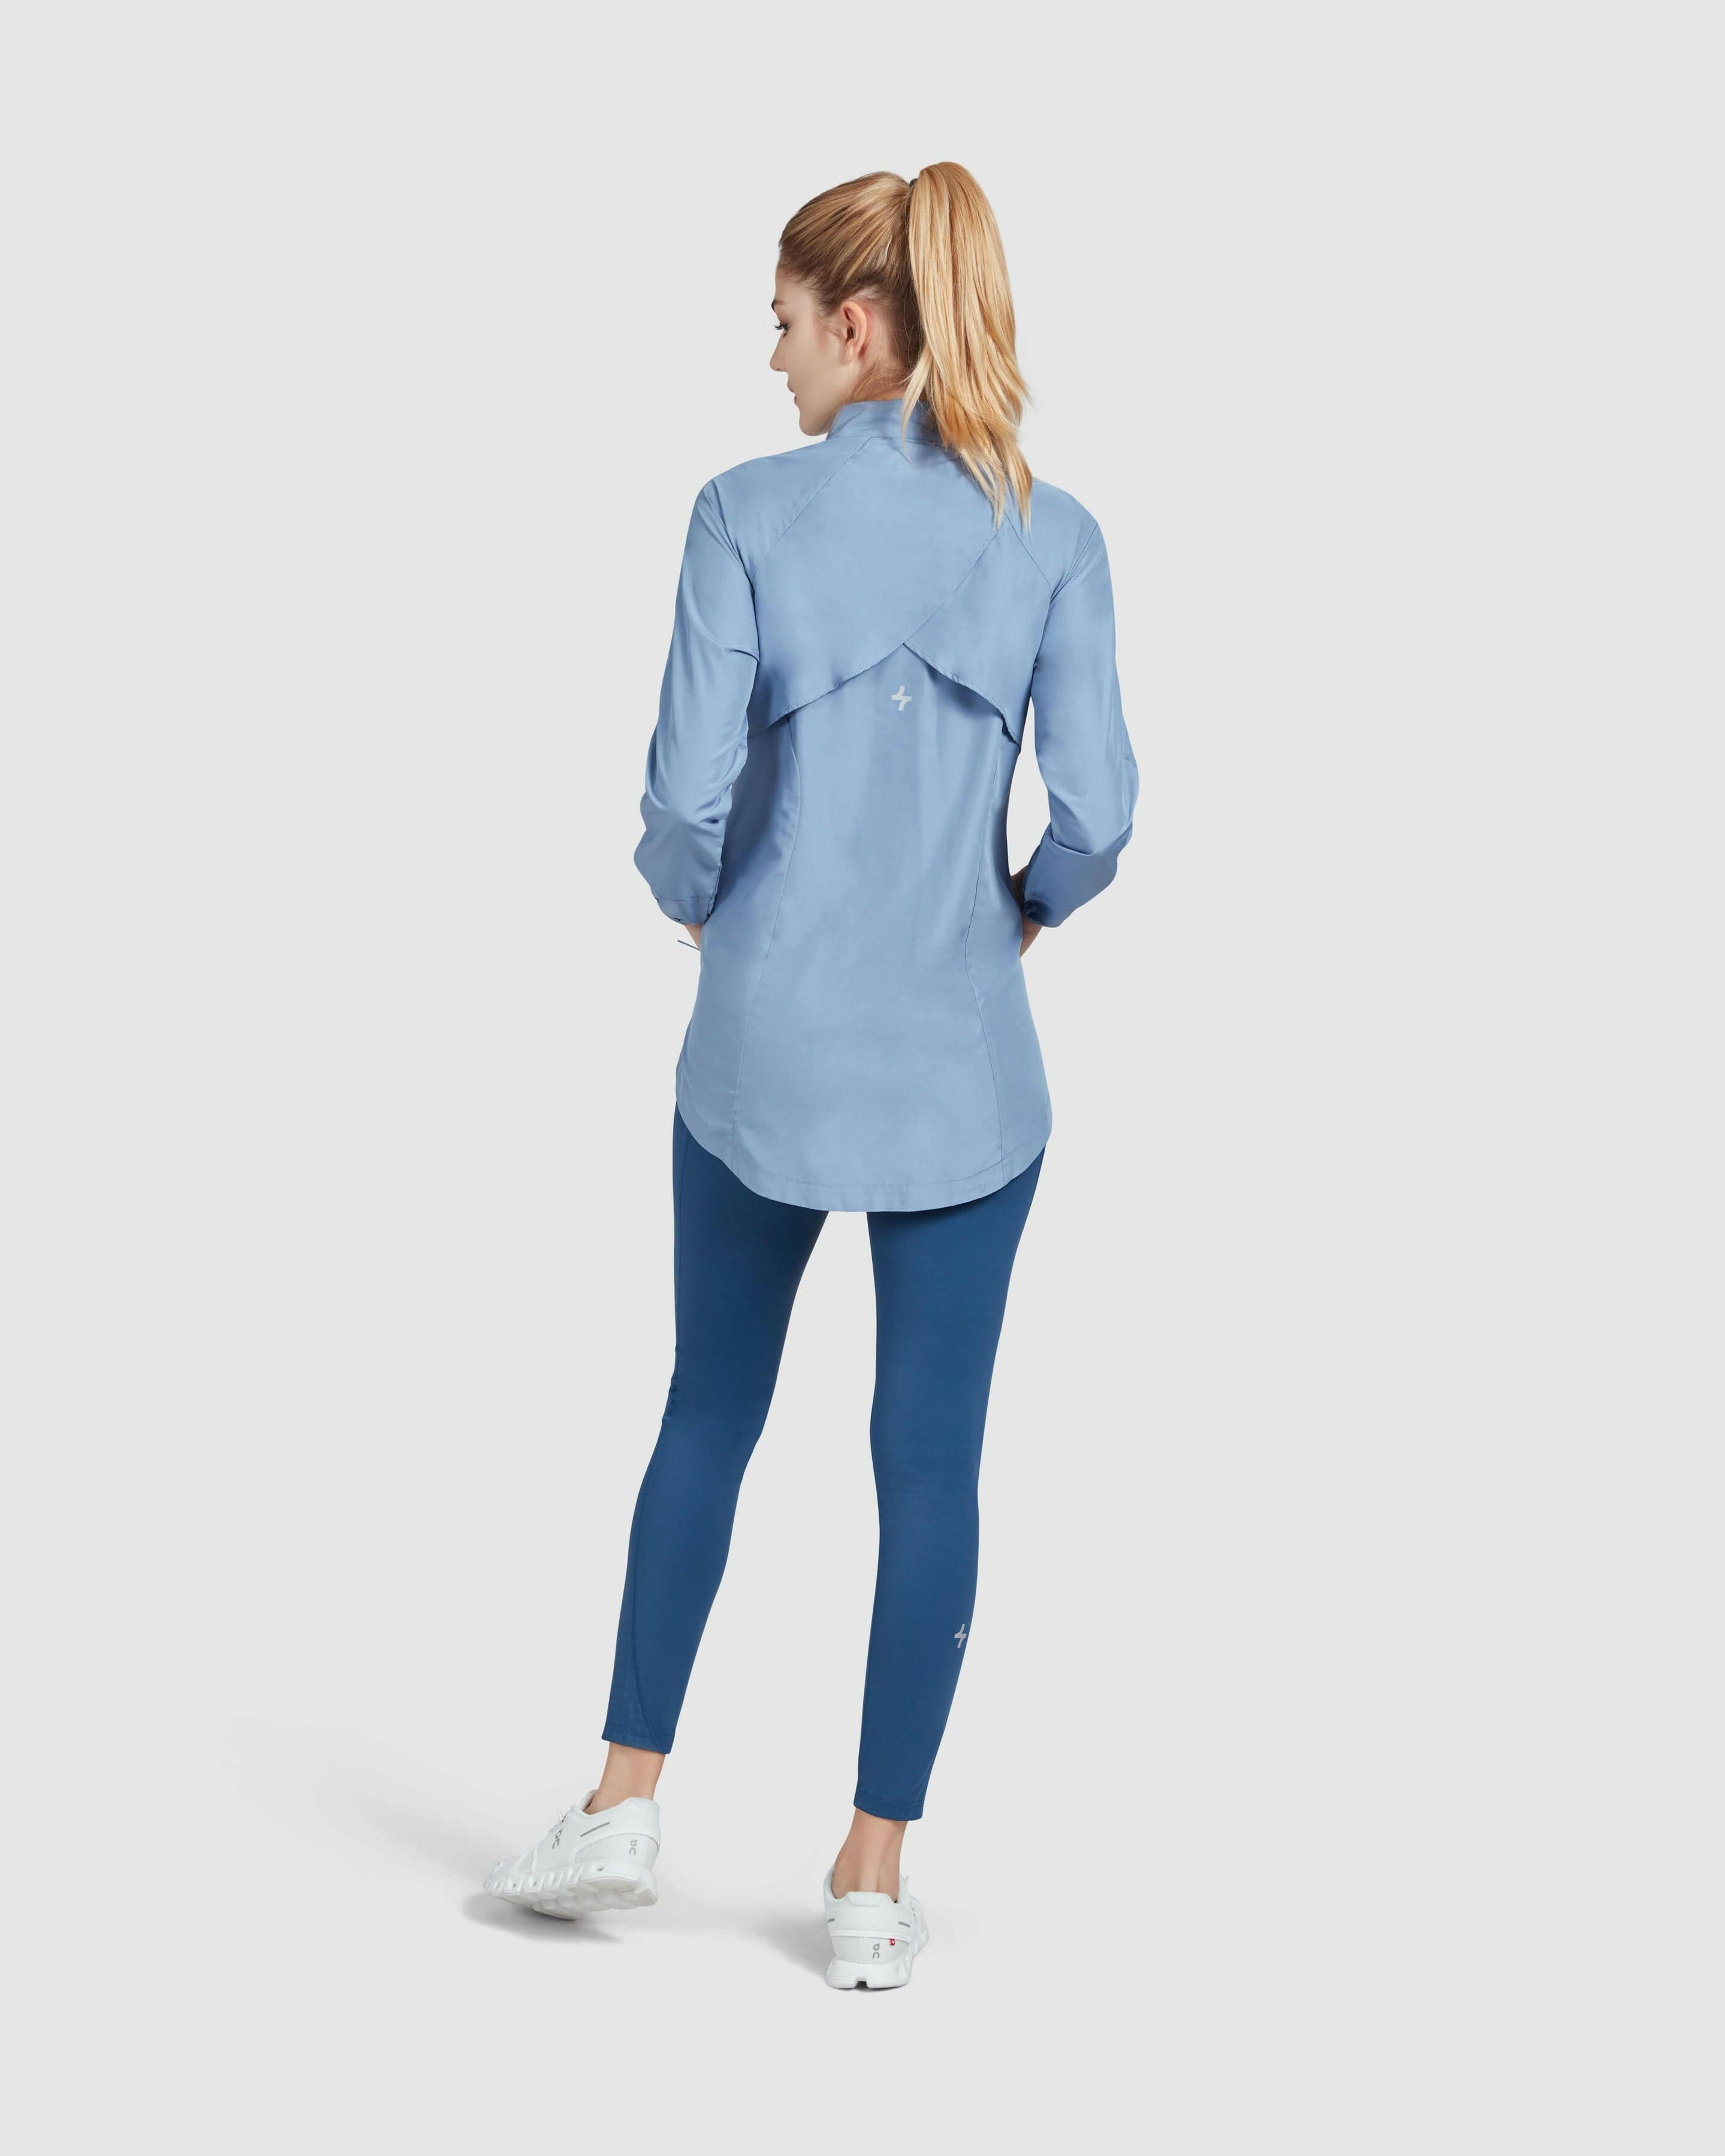 A model seen from behind, standing against a neutral background, wearing a Infinity Blue FLY JACKET by Qynda with a hidden mesh back.